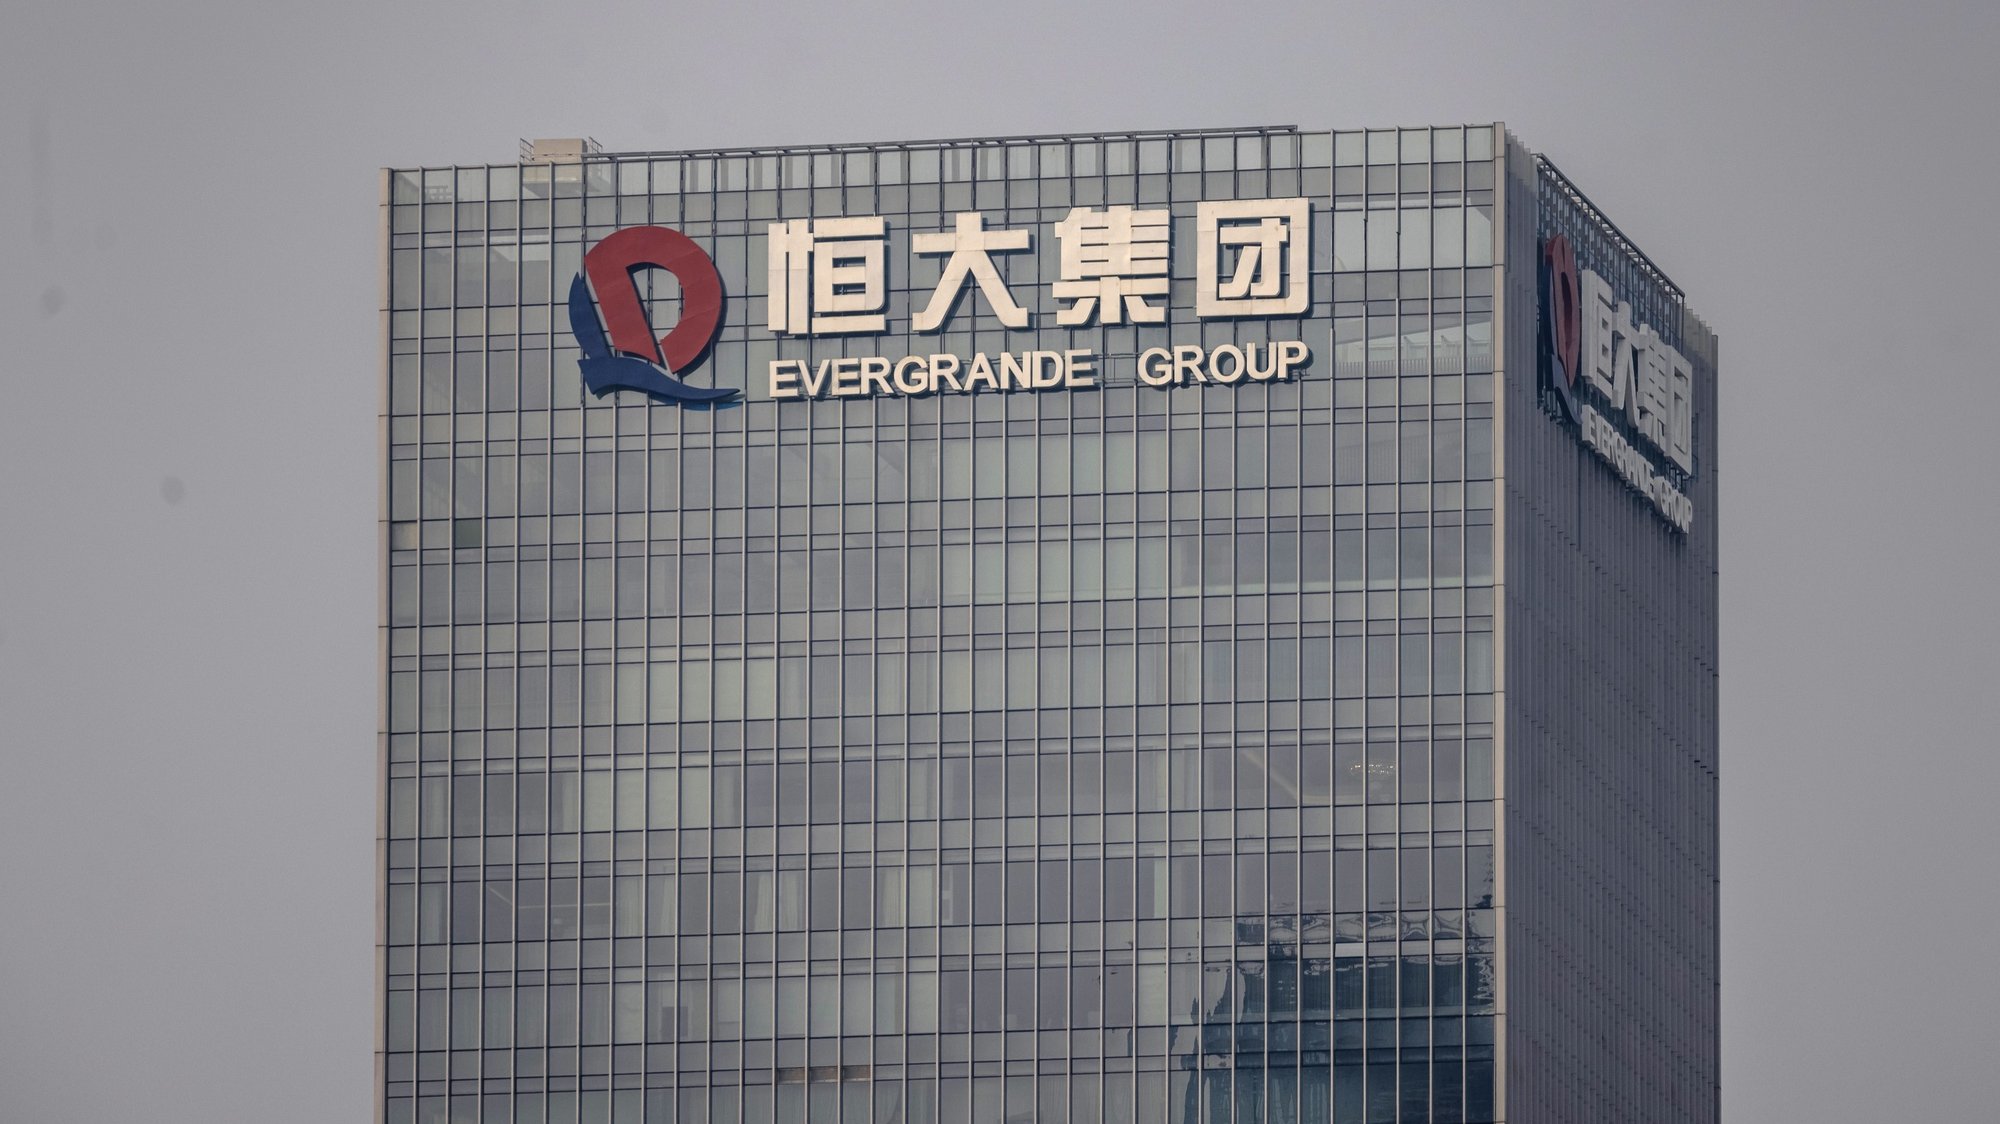 epa09499591 A Evergrande Group headquarters building is seen in Shenzhen, Guangdong province, China, 1 October 2021. To reassure investors, China Evergrande Group, the worldâ€™s most indebted property developer, has made several posts on its official social media this week claiming it has resumed work on 46 real estate projects in cities across China. Evergrande said this week that it plans to sell almost 20% of Shengjing Bank to a Chinese state-owned enterprise. In order to solve its upcoming liabilities, the company is trying to sell other assets such as an office building in Hong Kong, a property management services firm, and stakes in an electric-vehicle business.  EPA/ALEX PLAVEVSKI